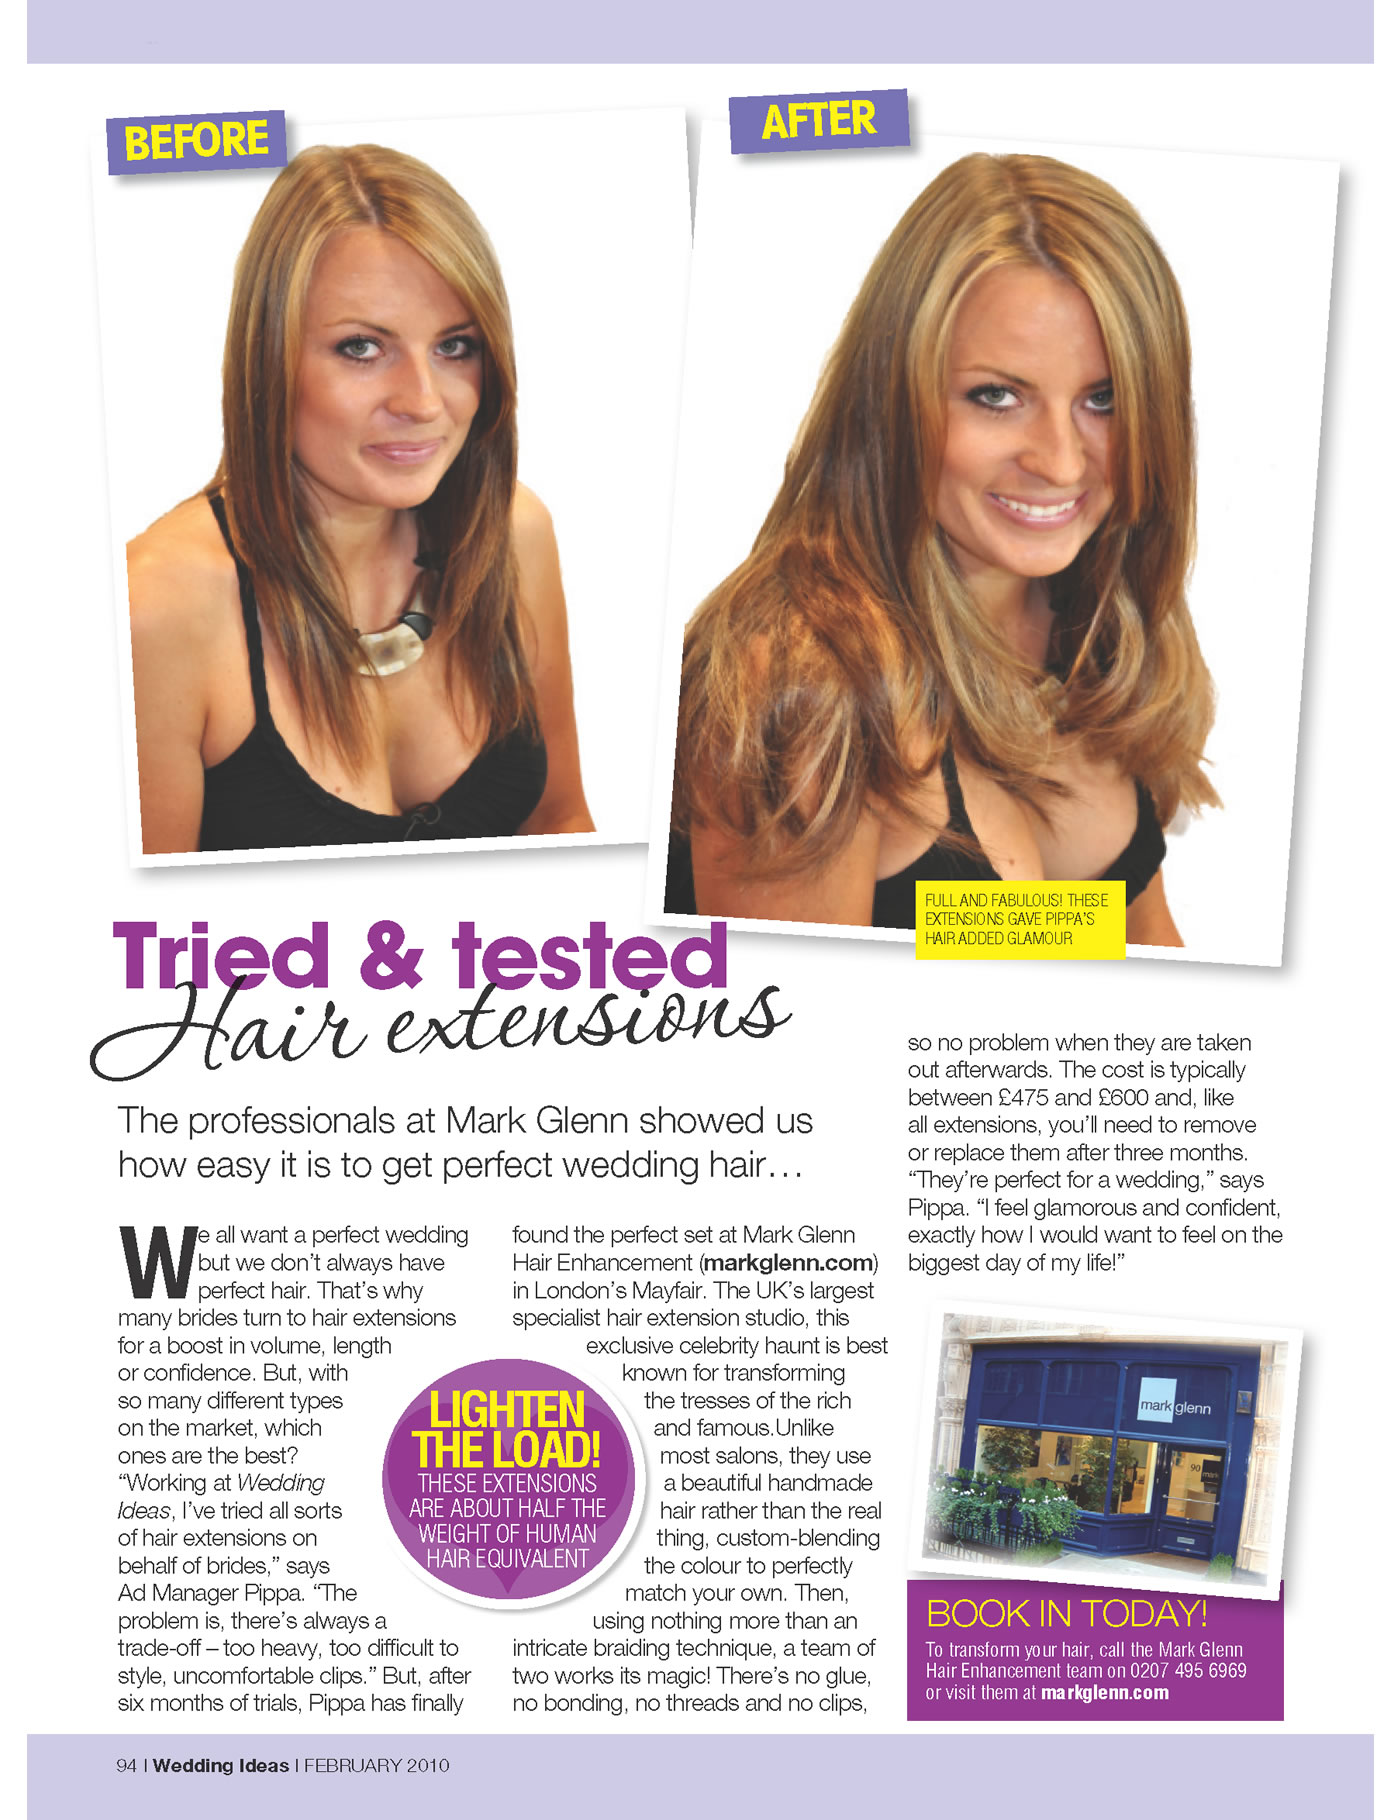 Wedding Ideas Magazine - 'Mark Glenn Hair Extensions - Tried and Tested' review